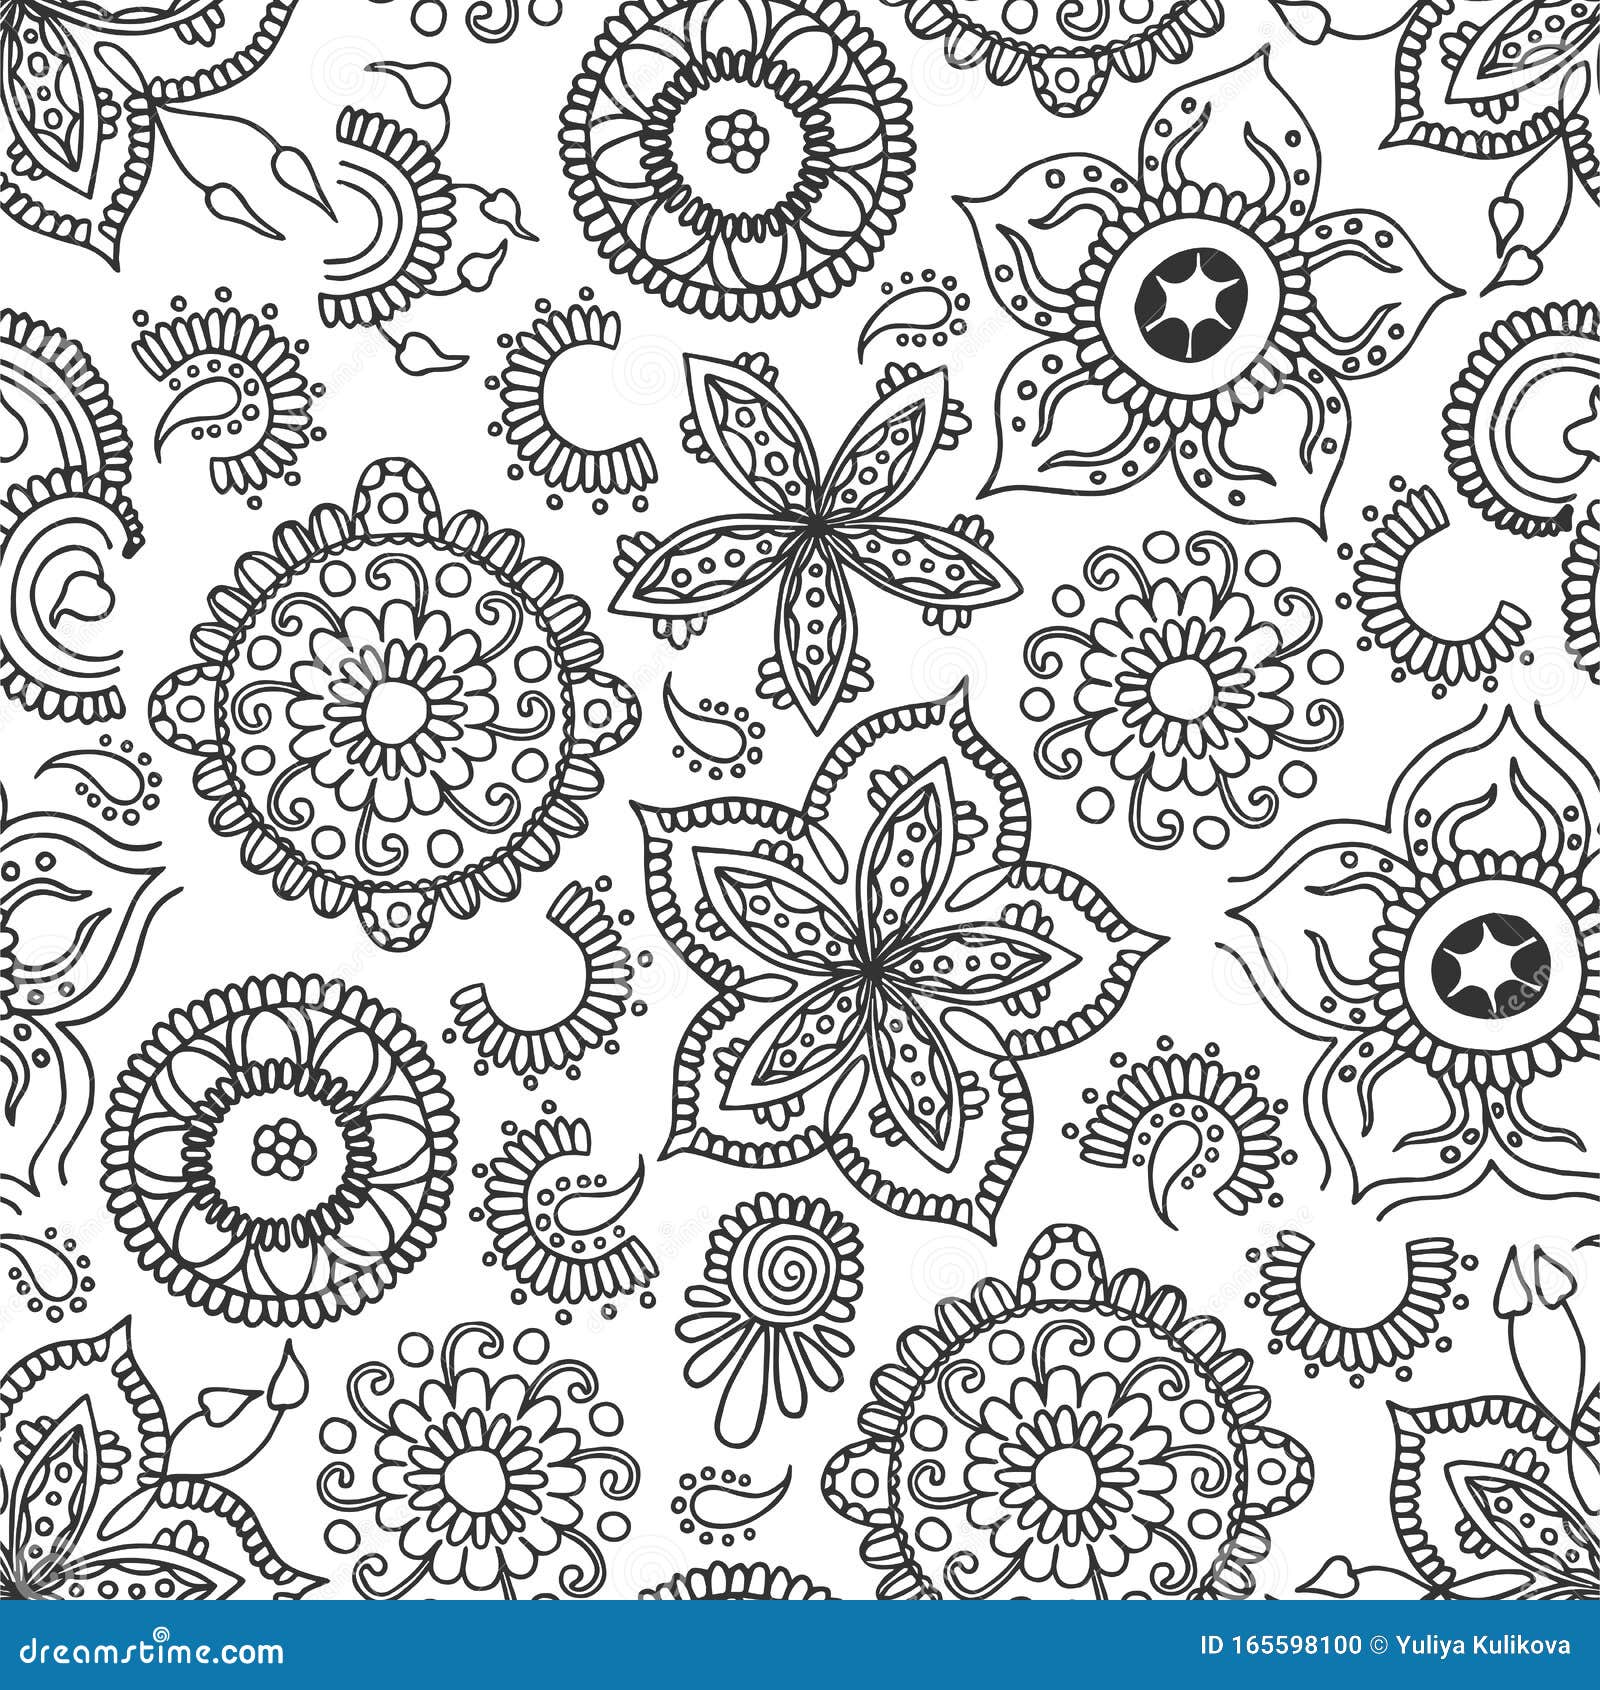 Paisley Flowers Doodle Seamless Pattern. Stock Vector - Illustration of ...